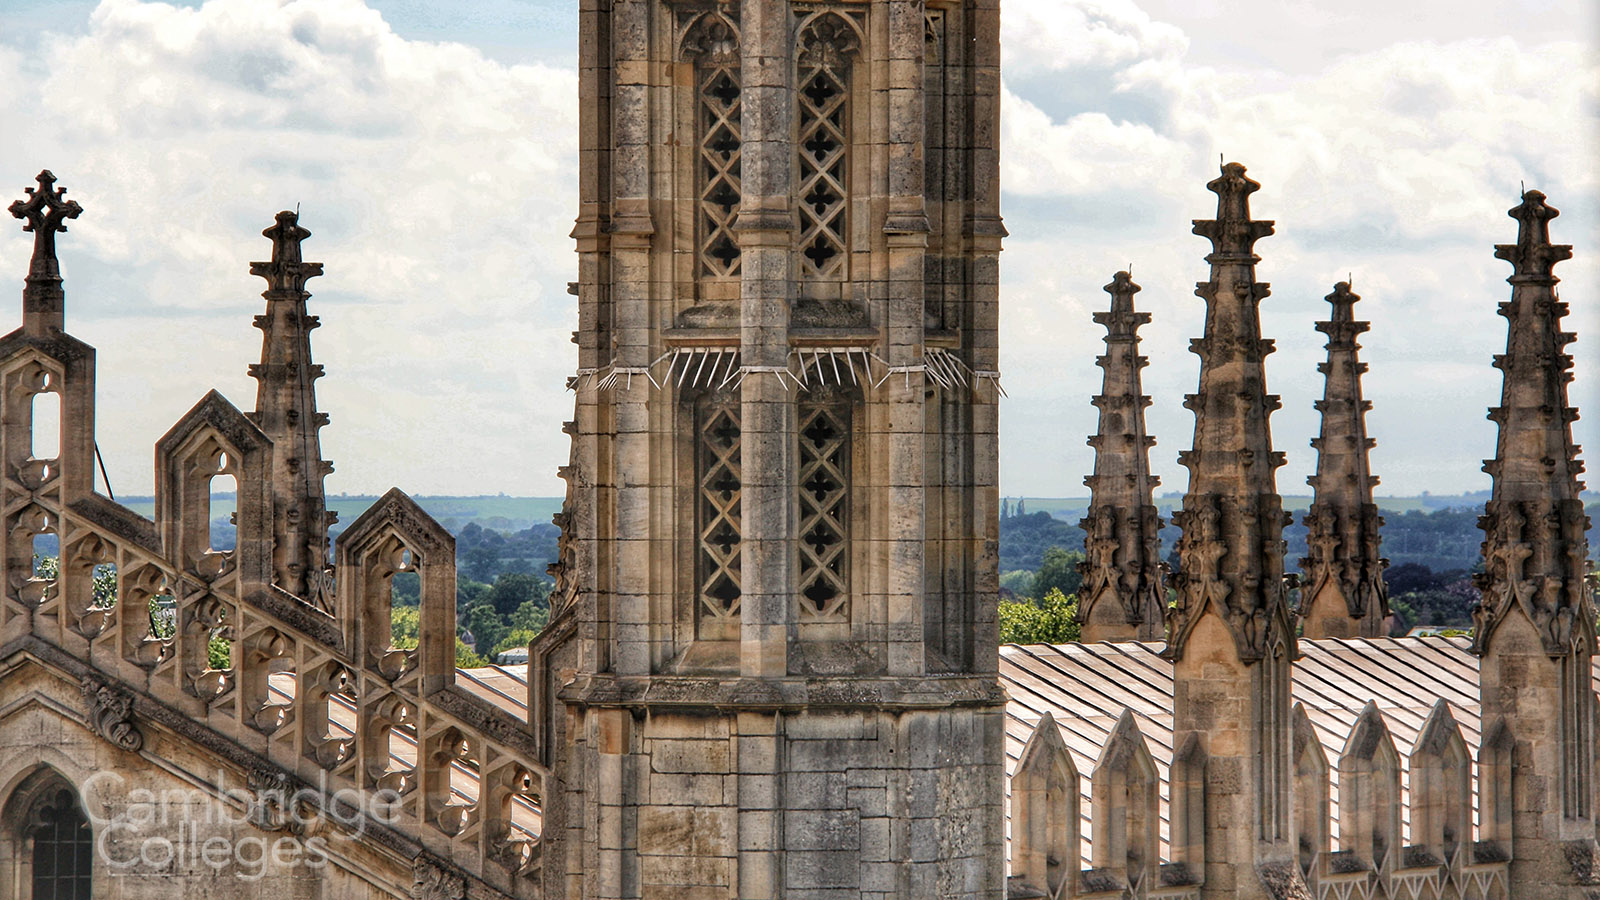 The spikes that adorn each of the four towers of King's college chapel